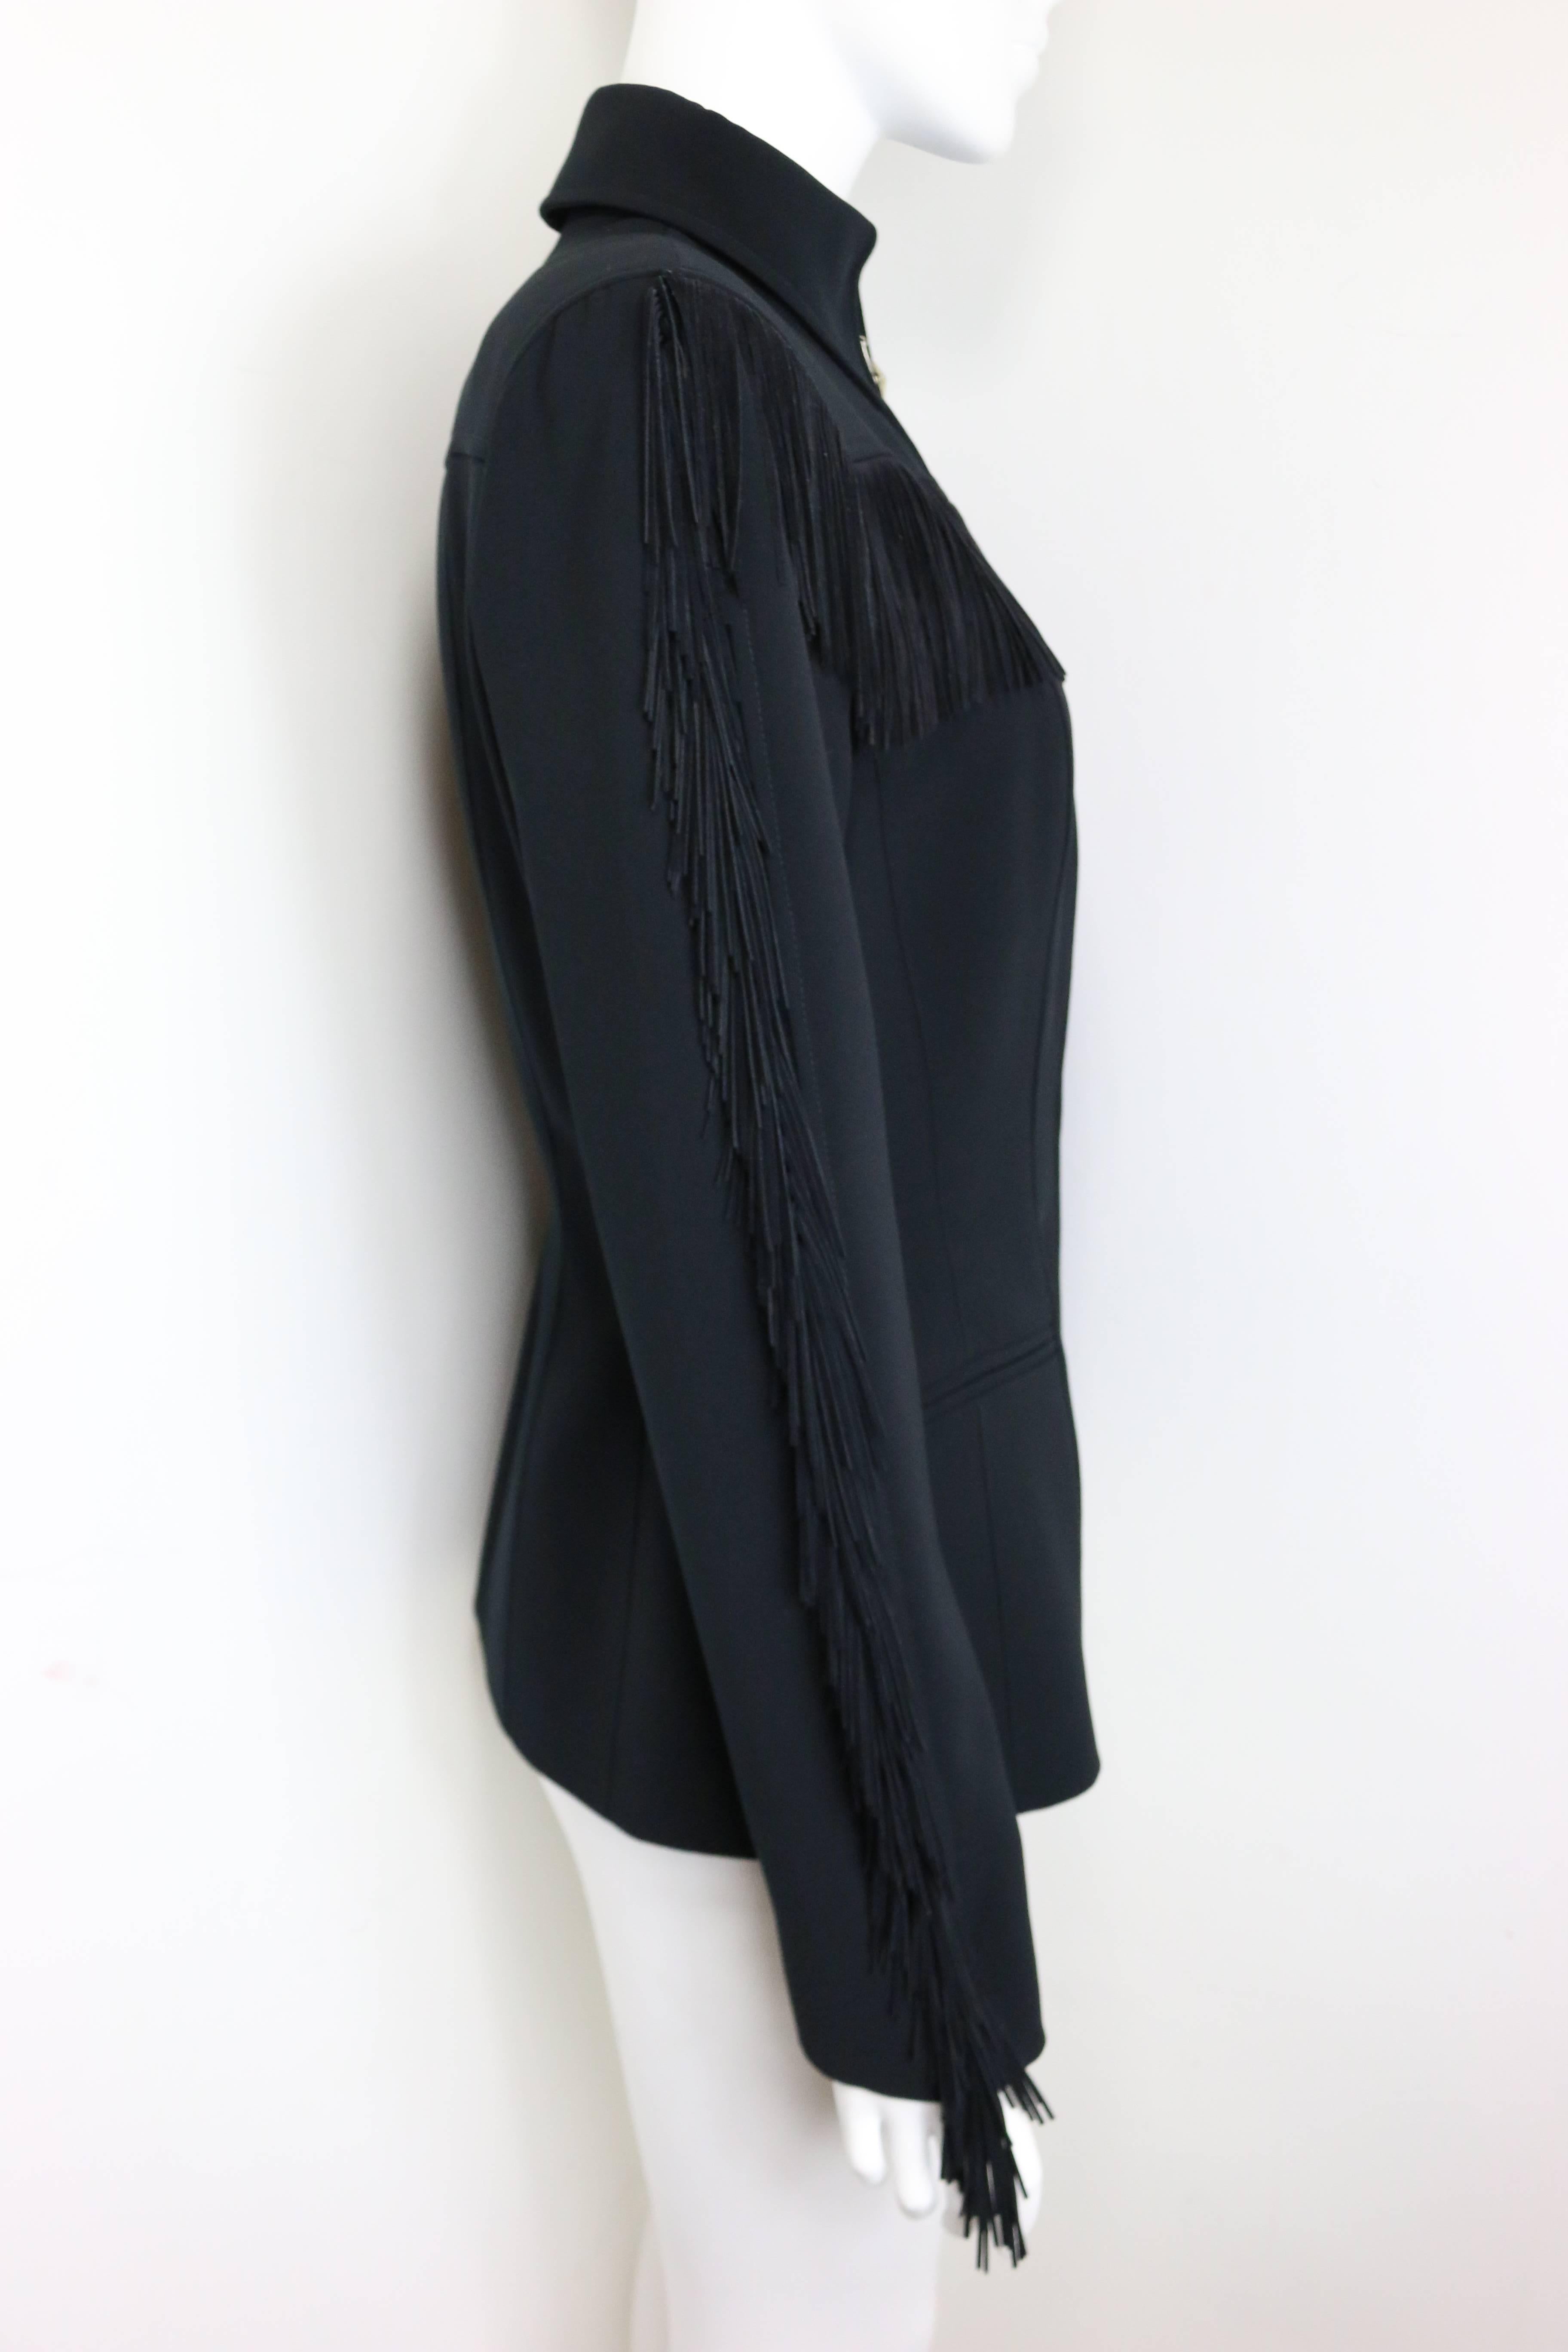 - Vintage 80s Thierry Mugler black structured shoulder fringe jacket. His signature fitted waist and powerful shoulder had millions of followers!!!

- Featuring a silver star button zipper closing, black suede fringe from bust to sleeves. Western